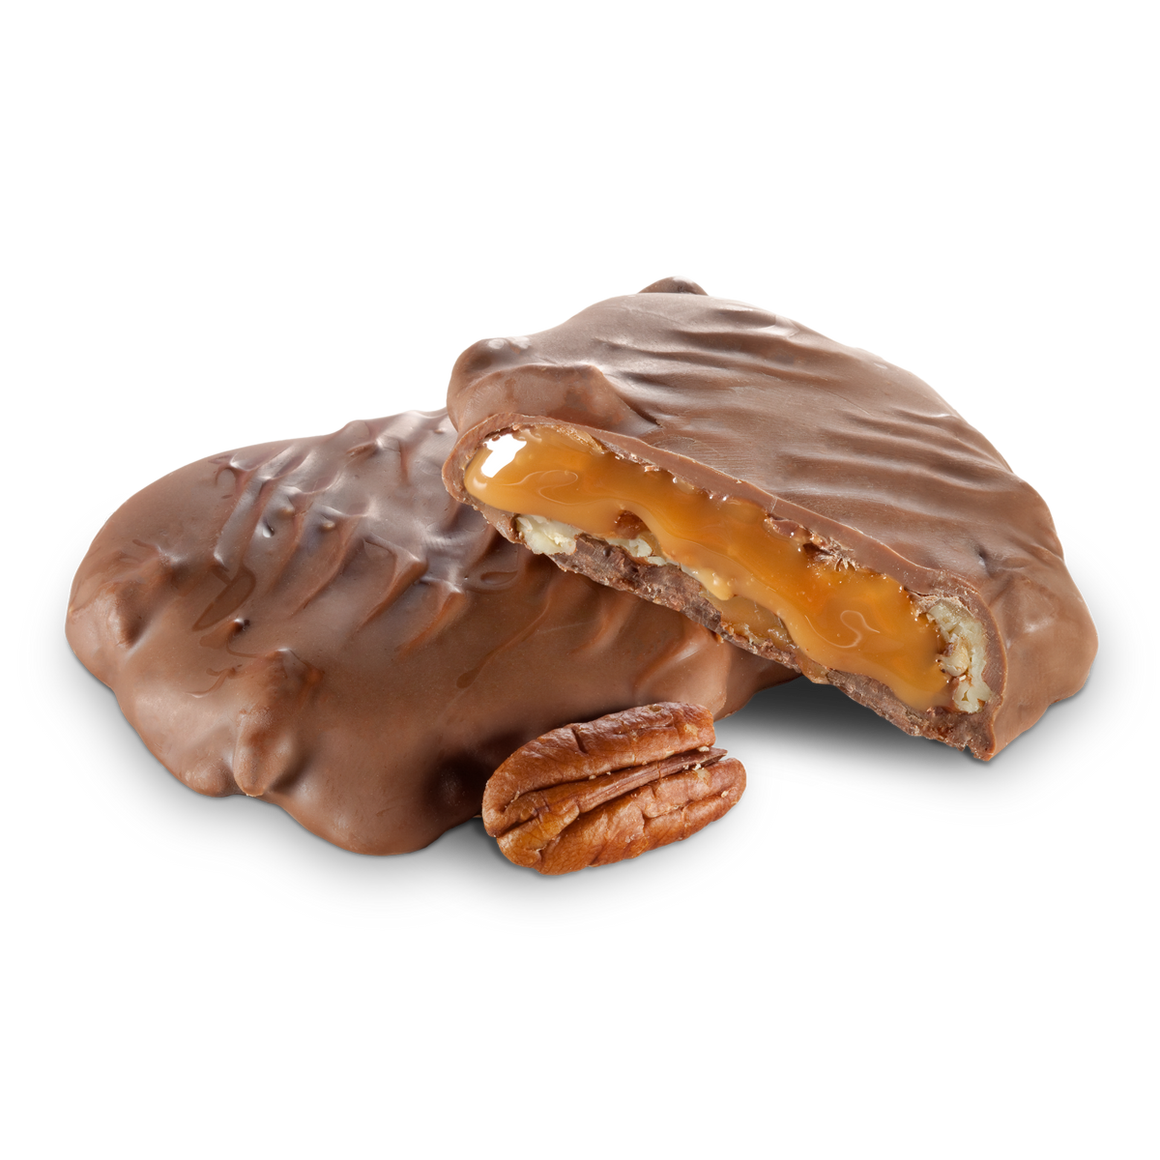 All City Candy Giant Milk Chocolate Pecan Caramel Patties - 1 LB Box Chocolate Albanese Confectionery For fresh candy and great service, visit www.allcitycandy.com